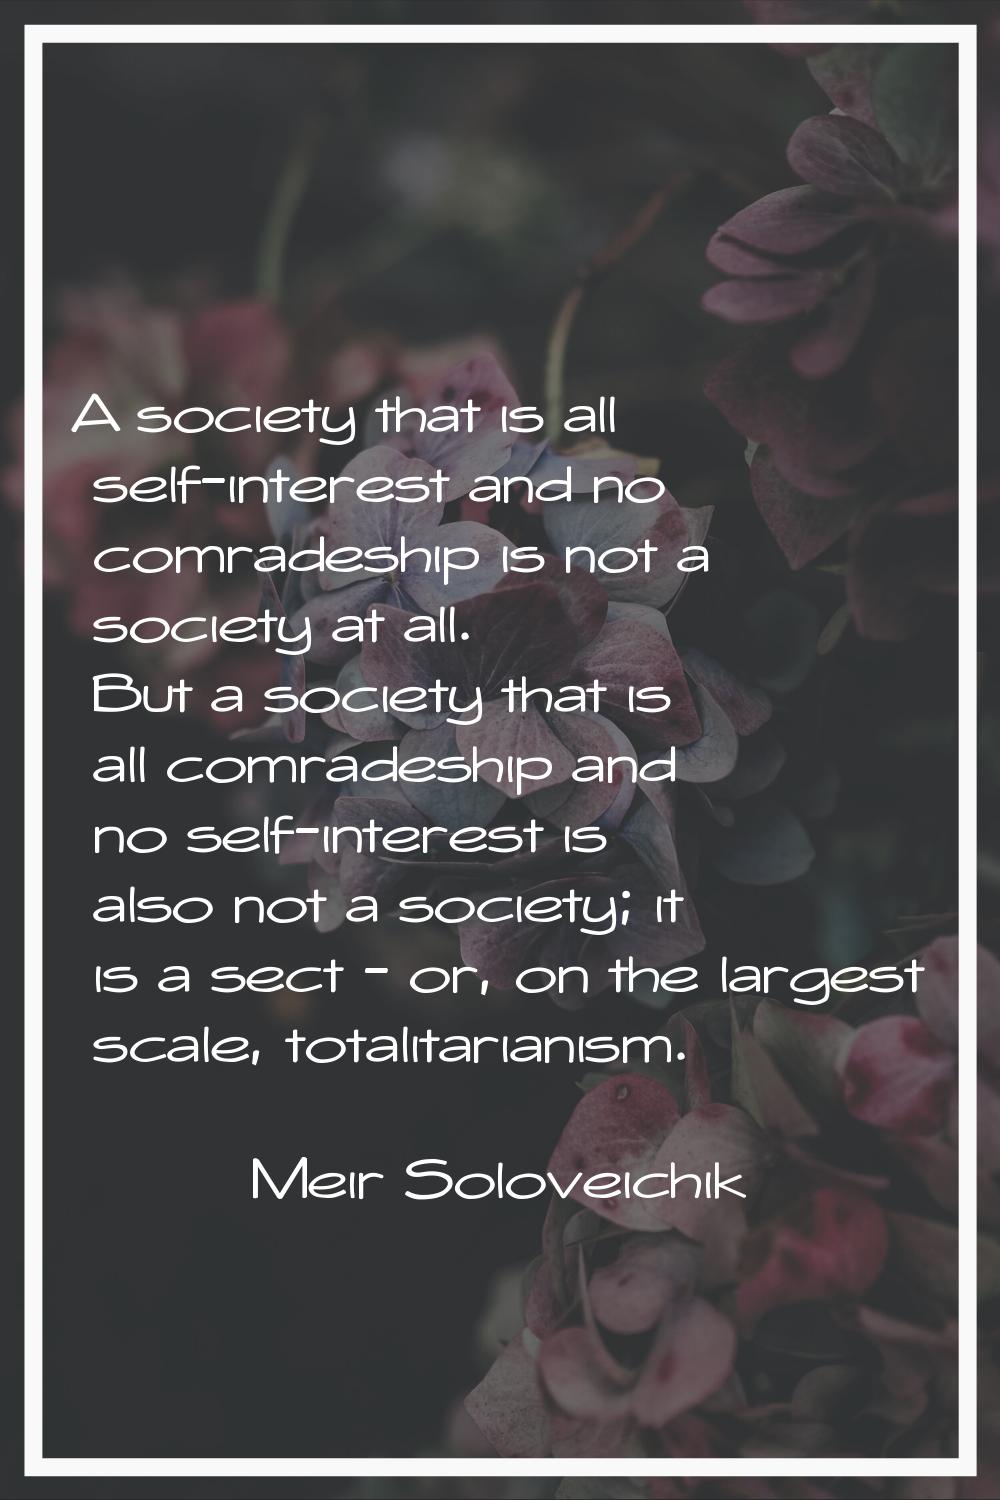 A society that is all self-interest and no comradeship is not a society at all. But a society that 